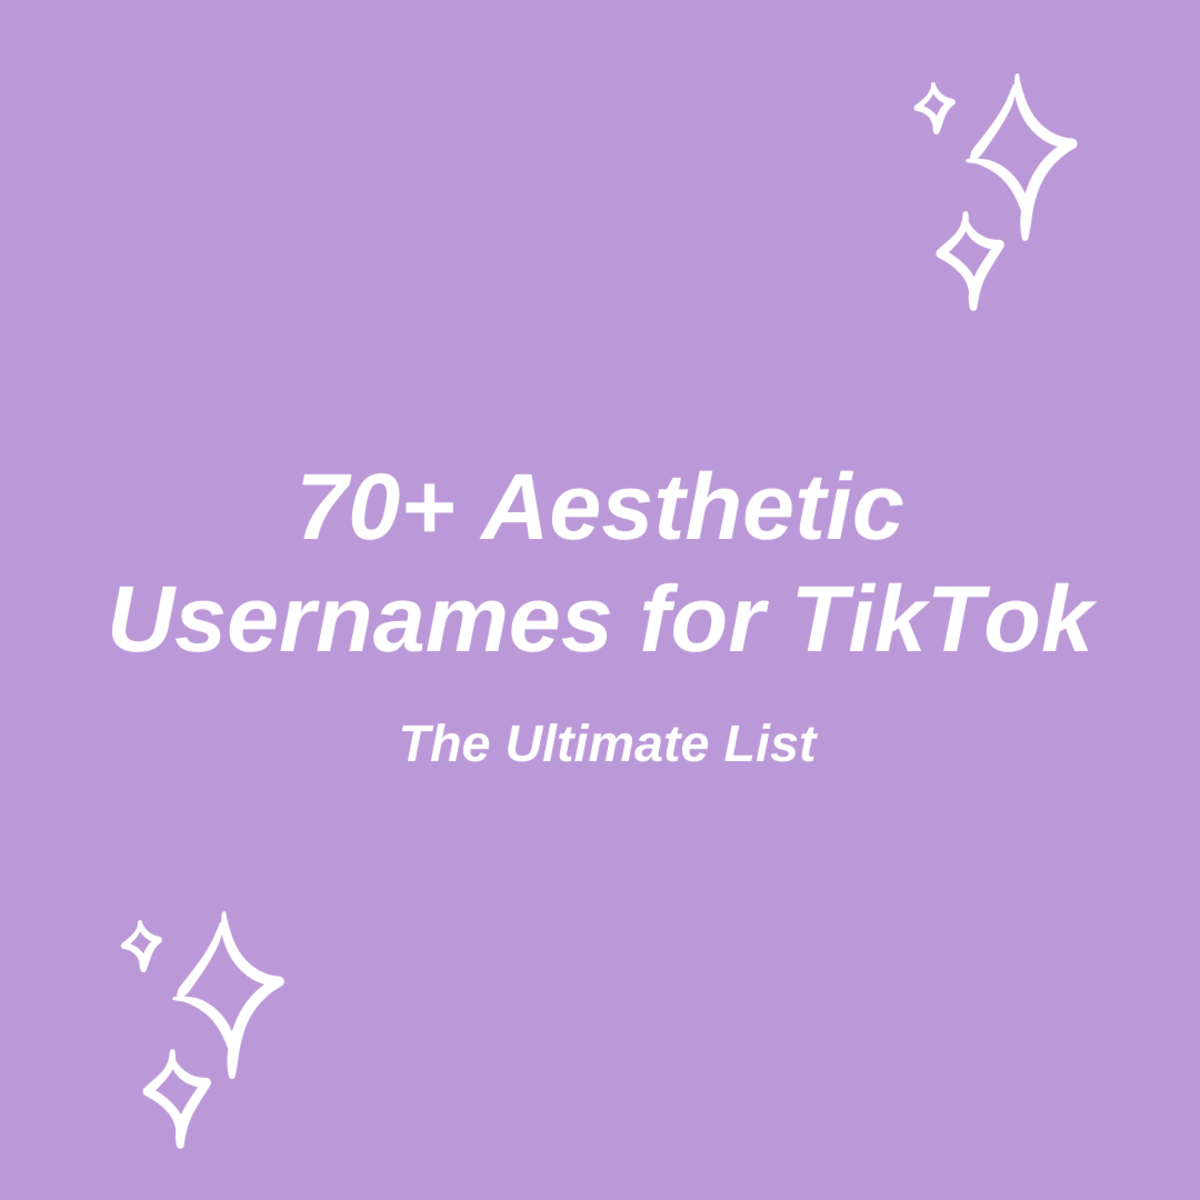 Discover over 70 aesthetic usernames for TikTok in this comprehensive list!